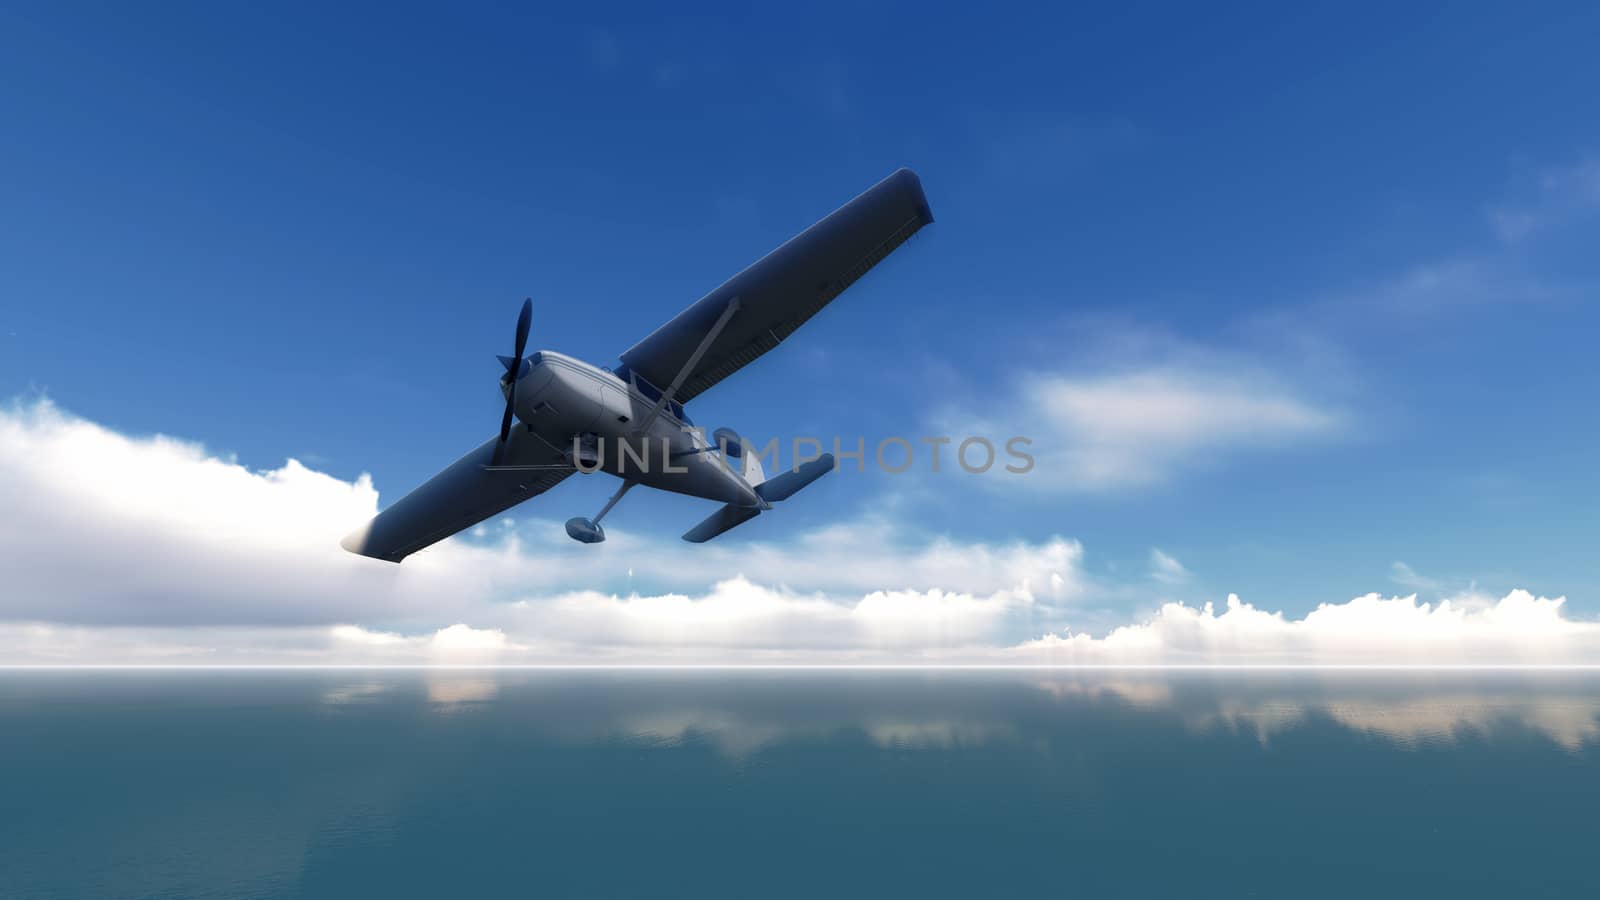 The plane was flying over the sea on blue sky